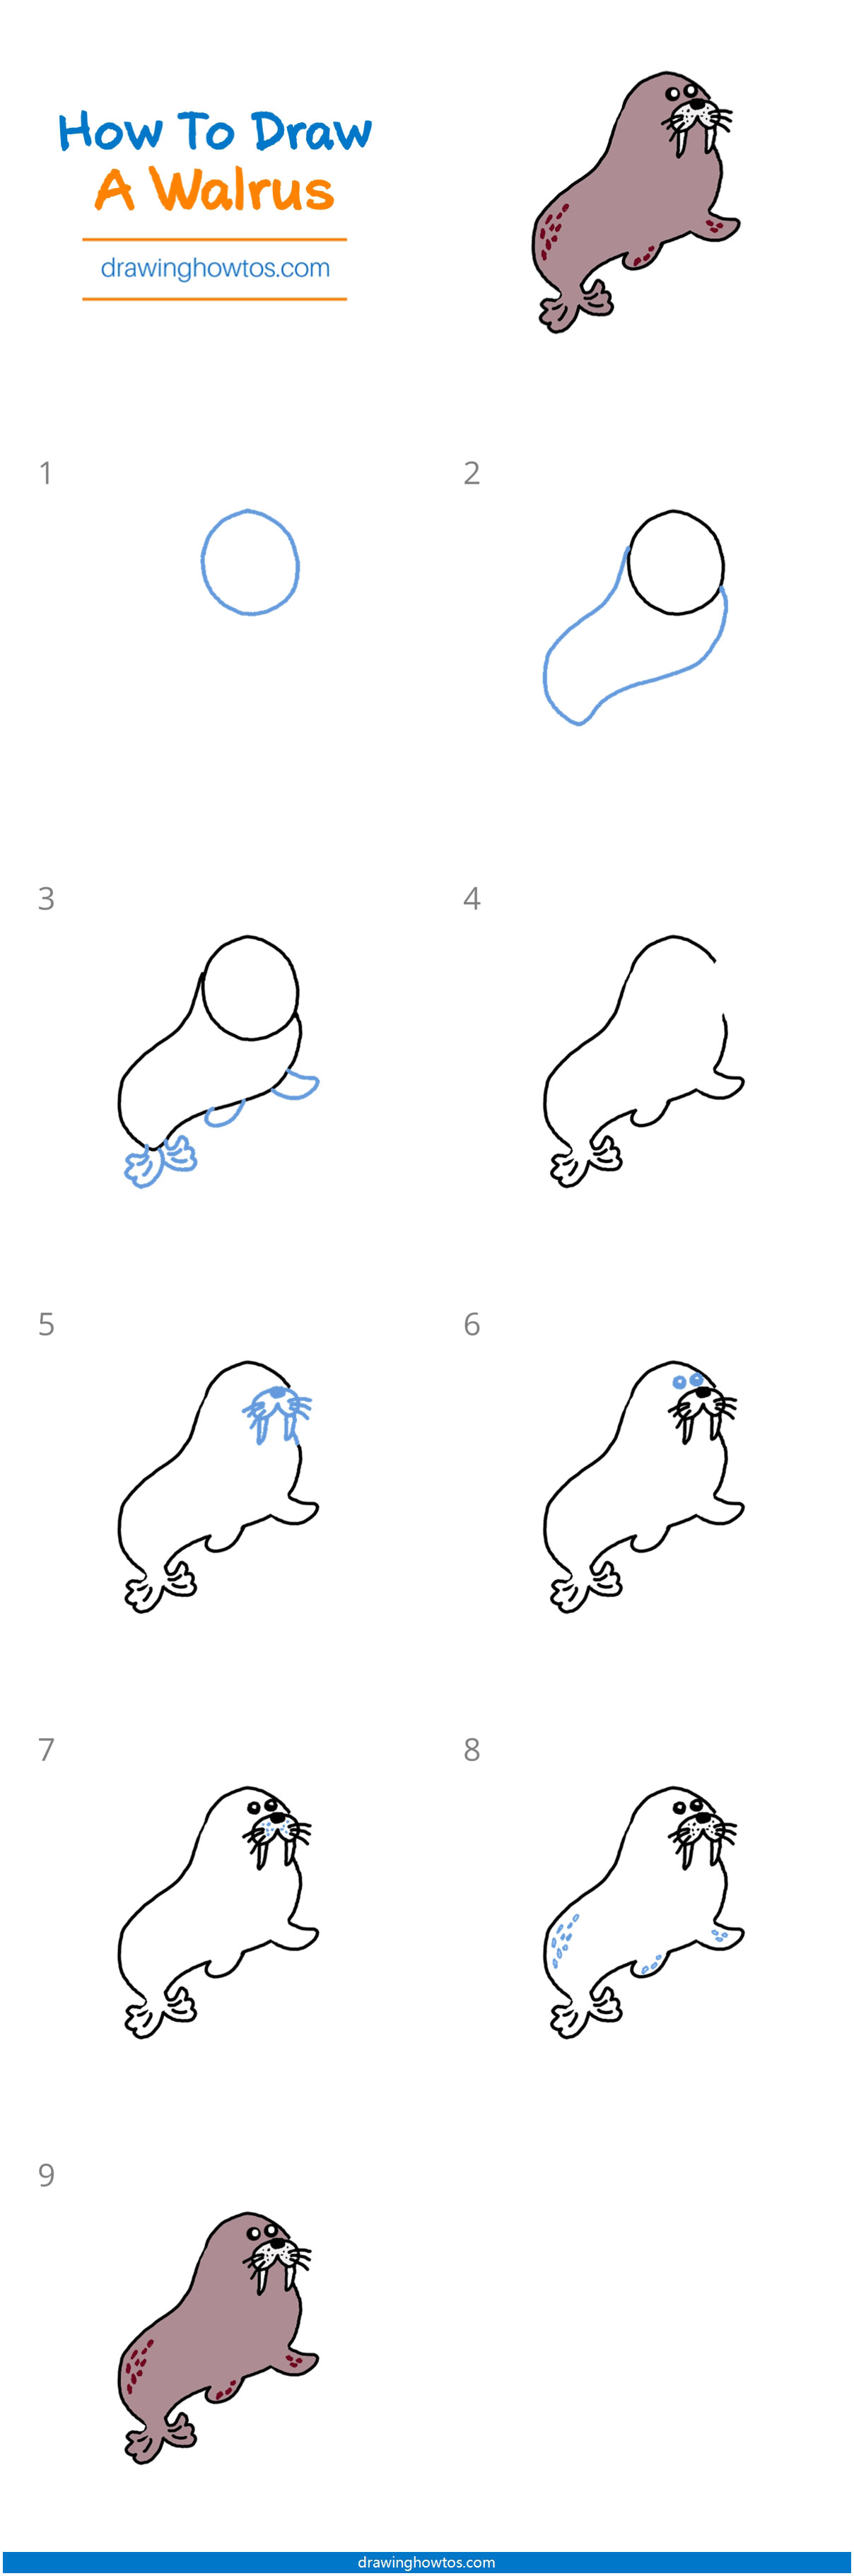 How to Draw a Walurs Step by Step